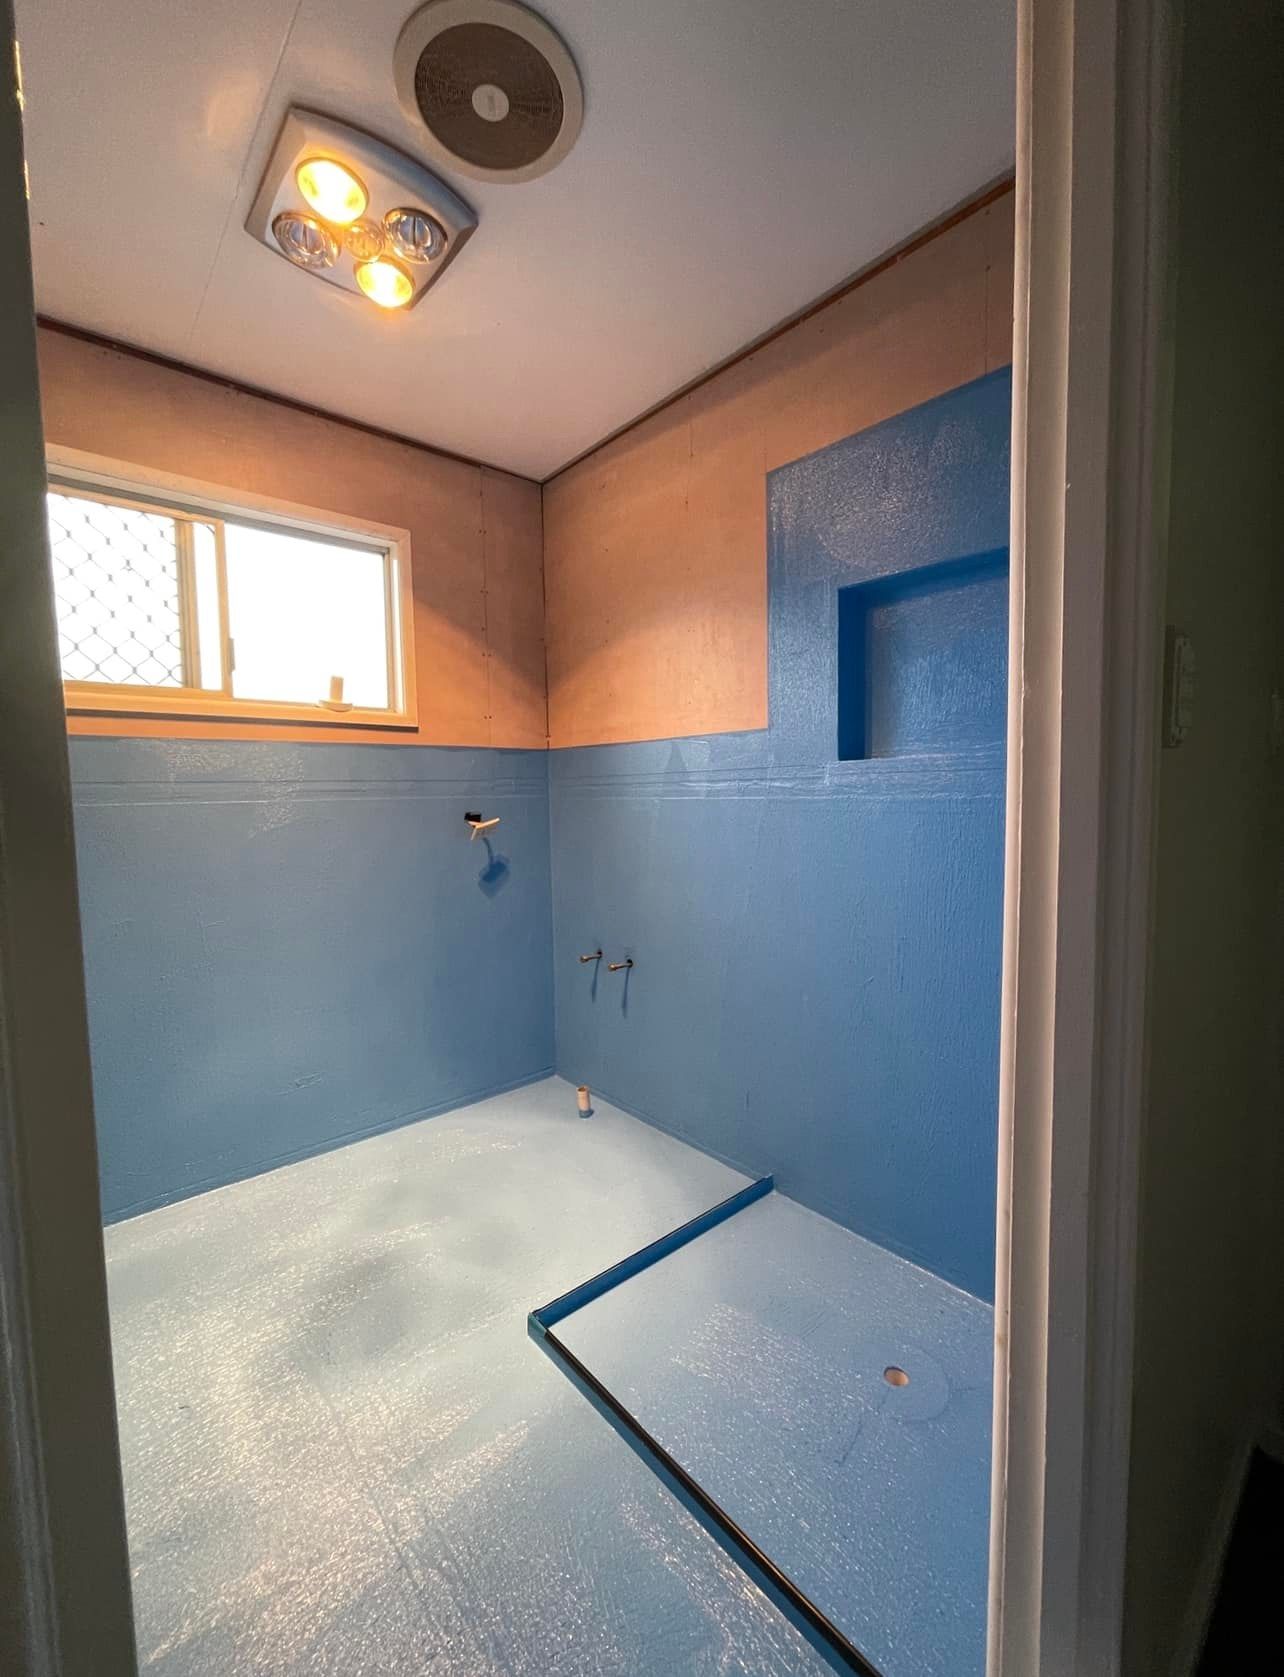 A Bathroom with Blue Walls and a Fan on the Ceiling — Waterproofing Solutions in Toowoomba, QLD